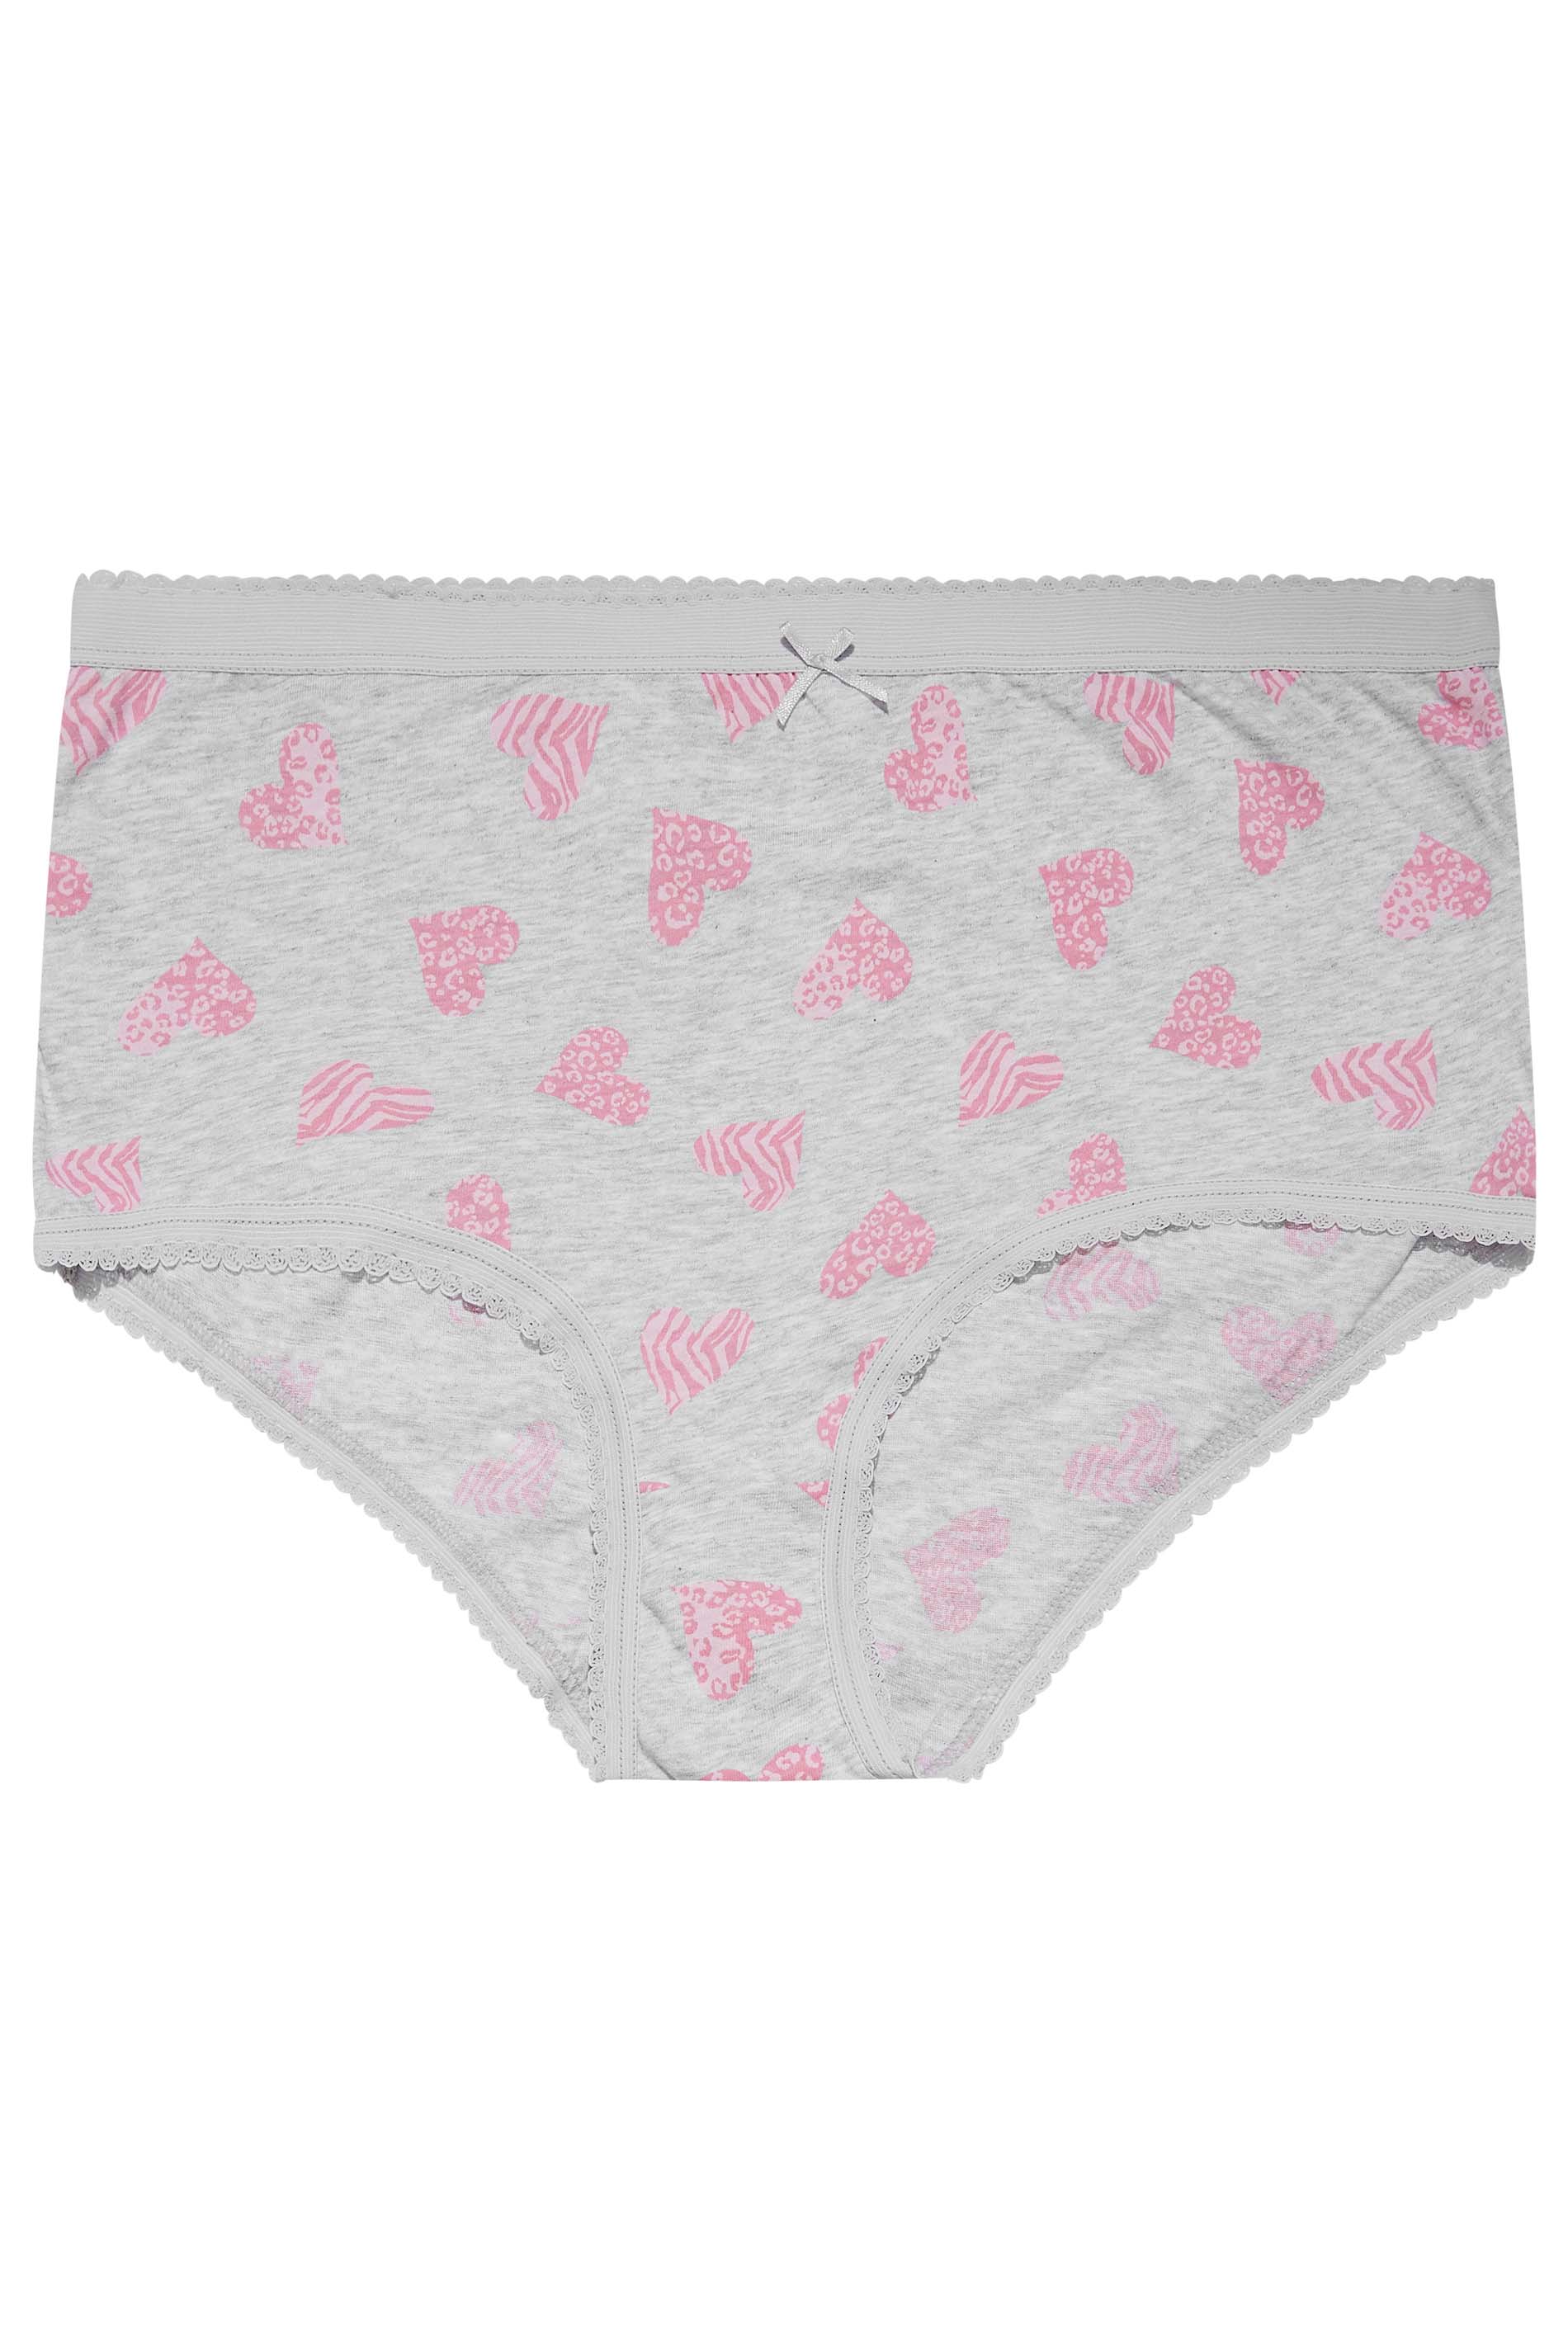 5 PACK Curve Grey & Pink Animal Print Heart Full Briefs | Yours Clothing 3